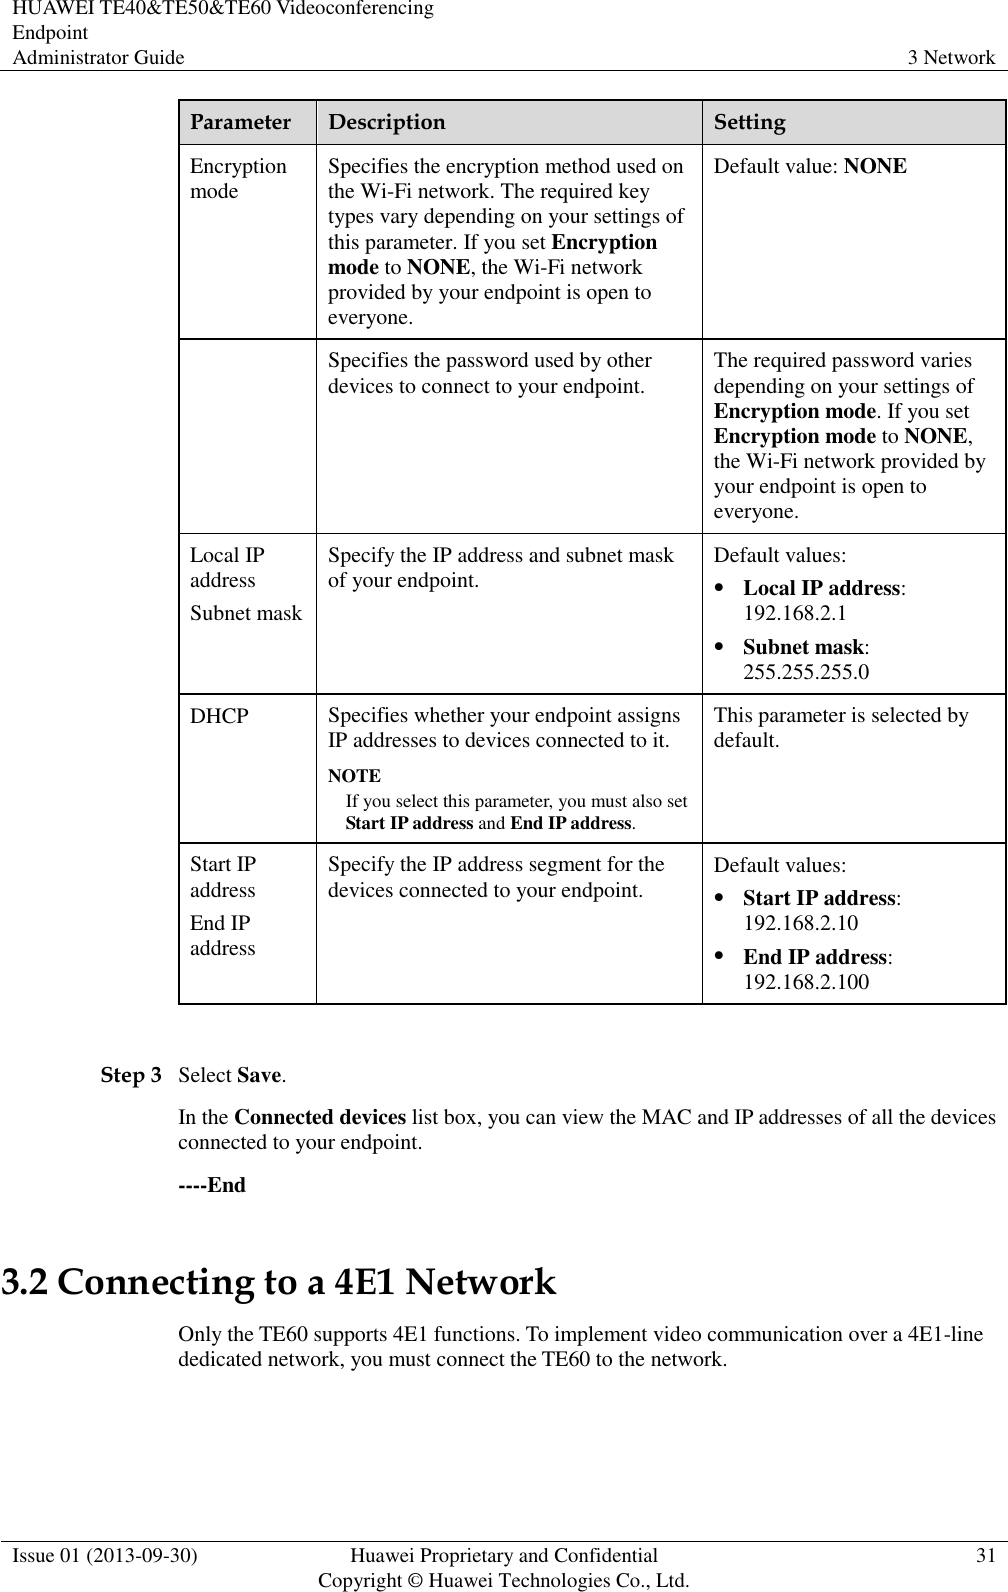 HUAWEI TE40&amp;TE50&amp;TE60 Videoconferencing Endpoint Administrator Guide 3 Network  Issue 01 (2013-09-30) Huawei Proprietary and Confidential                                     Copyright © Huawei Technologies Co., Ltd. 31  Parameter Description Setting Encryption mode Specifies the encryption method used on the Wi-Fi network. The required key types vary depending on your settings of this parameter. If you set Encryption mode to NONE, the Wi-Fi network provided by your endpoint is open to everyone. Default value: NONE  Specifies the password used by other devices to connect to your endpoint. The required password varies depending on your settings of Encryption mode. If you set Encryption mode to NONE, the Wi-Fi network provided by your endpoint is open to everyone. Local IP address Subnet mask Specify the IP address and subnet mask of your endpoint. Default values:  Local IP address: 192.168.2.1  Subnet mask: 255.255.255.0 DHCP Specifies whether your endpoint assigns IP addresses to devices connected to it.   NOTE If you select this parameter, you must also set Start IP address and End IP address. This parameter is selected by default. Start IP address End IP address Specify the IP address segment for the devices connected to your endpoint. Default values:    Start IP address: 192.168.2.10  End IP address: 192.168.2.100  Step 3 Select Save. In the Connected devices list box, you can view the MAC and IP addresses of all the devices connected to your endpoint. ----End 3.2 Connecting to a 4E1 Network Only the TE60 supports 4E1 functions. To implement video communication over a 4E1-line dedicated network, you must connect the TE60 to the network.  